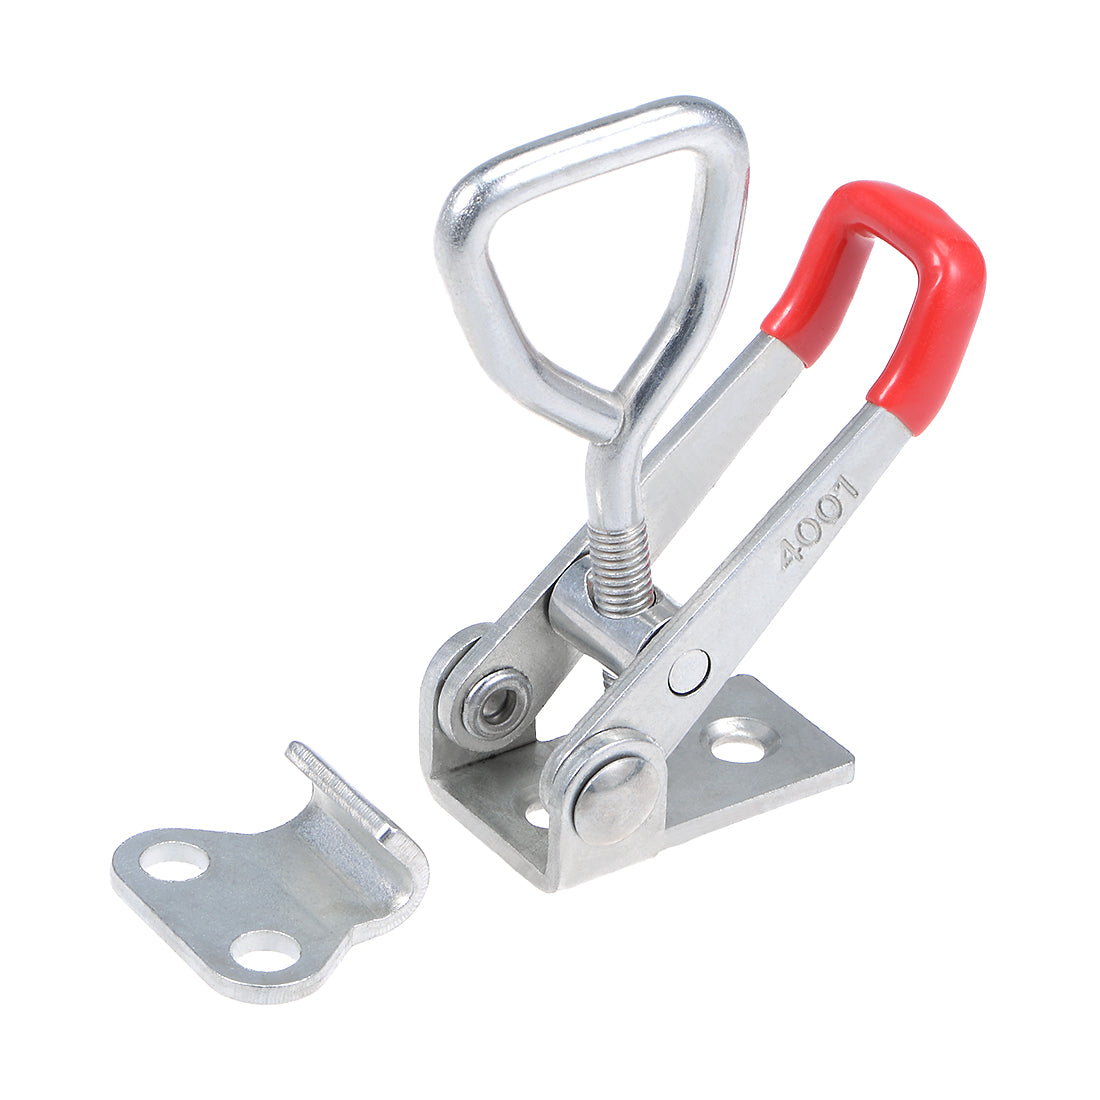 uxcell Uxcell Toggle Latch Clamp 100Kg 220lbs Capacity Pull Action Adjustable Latch DEMA-4001